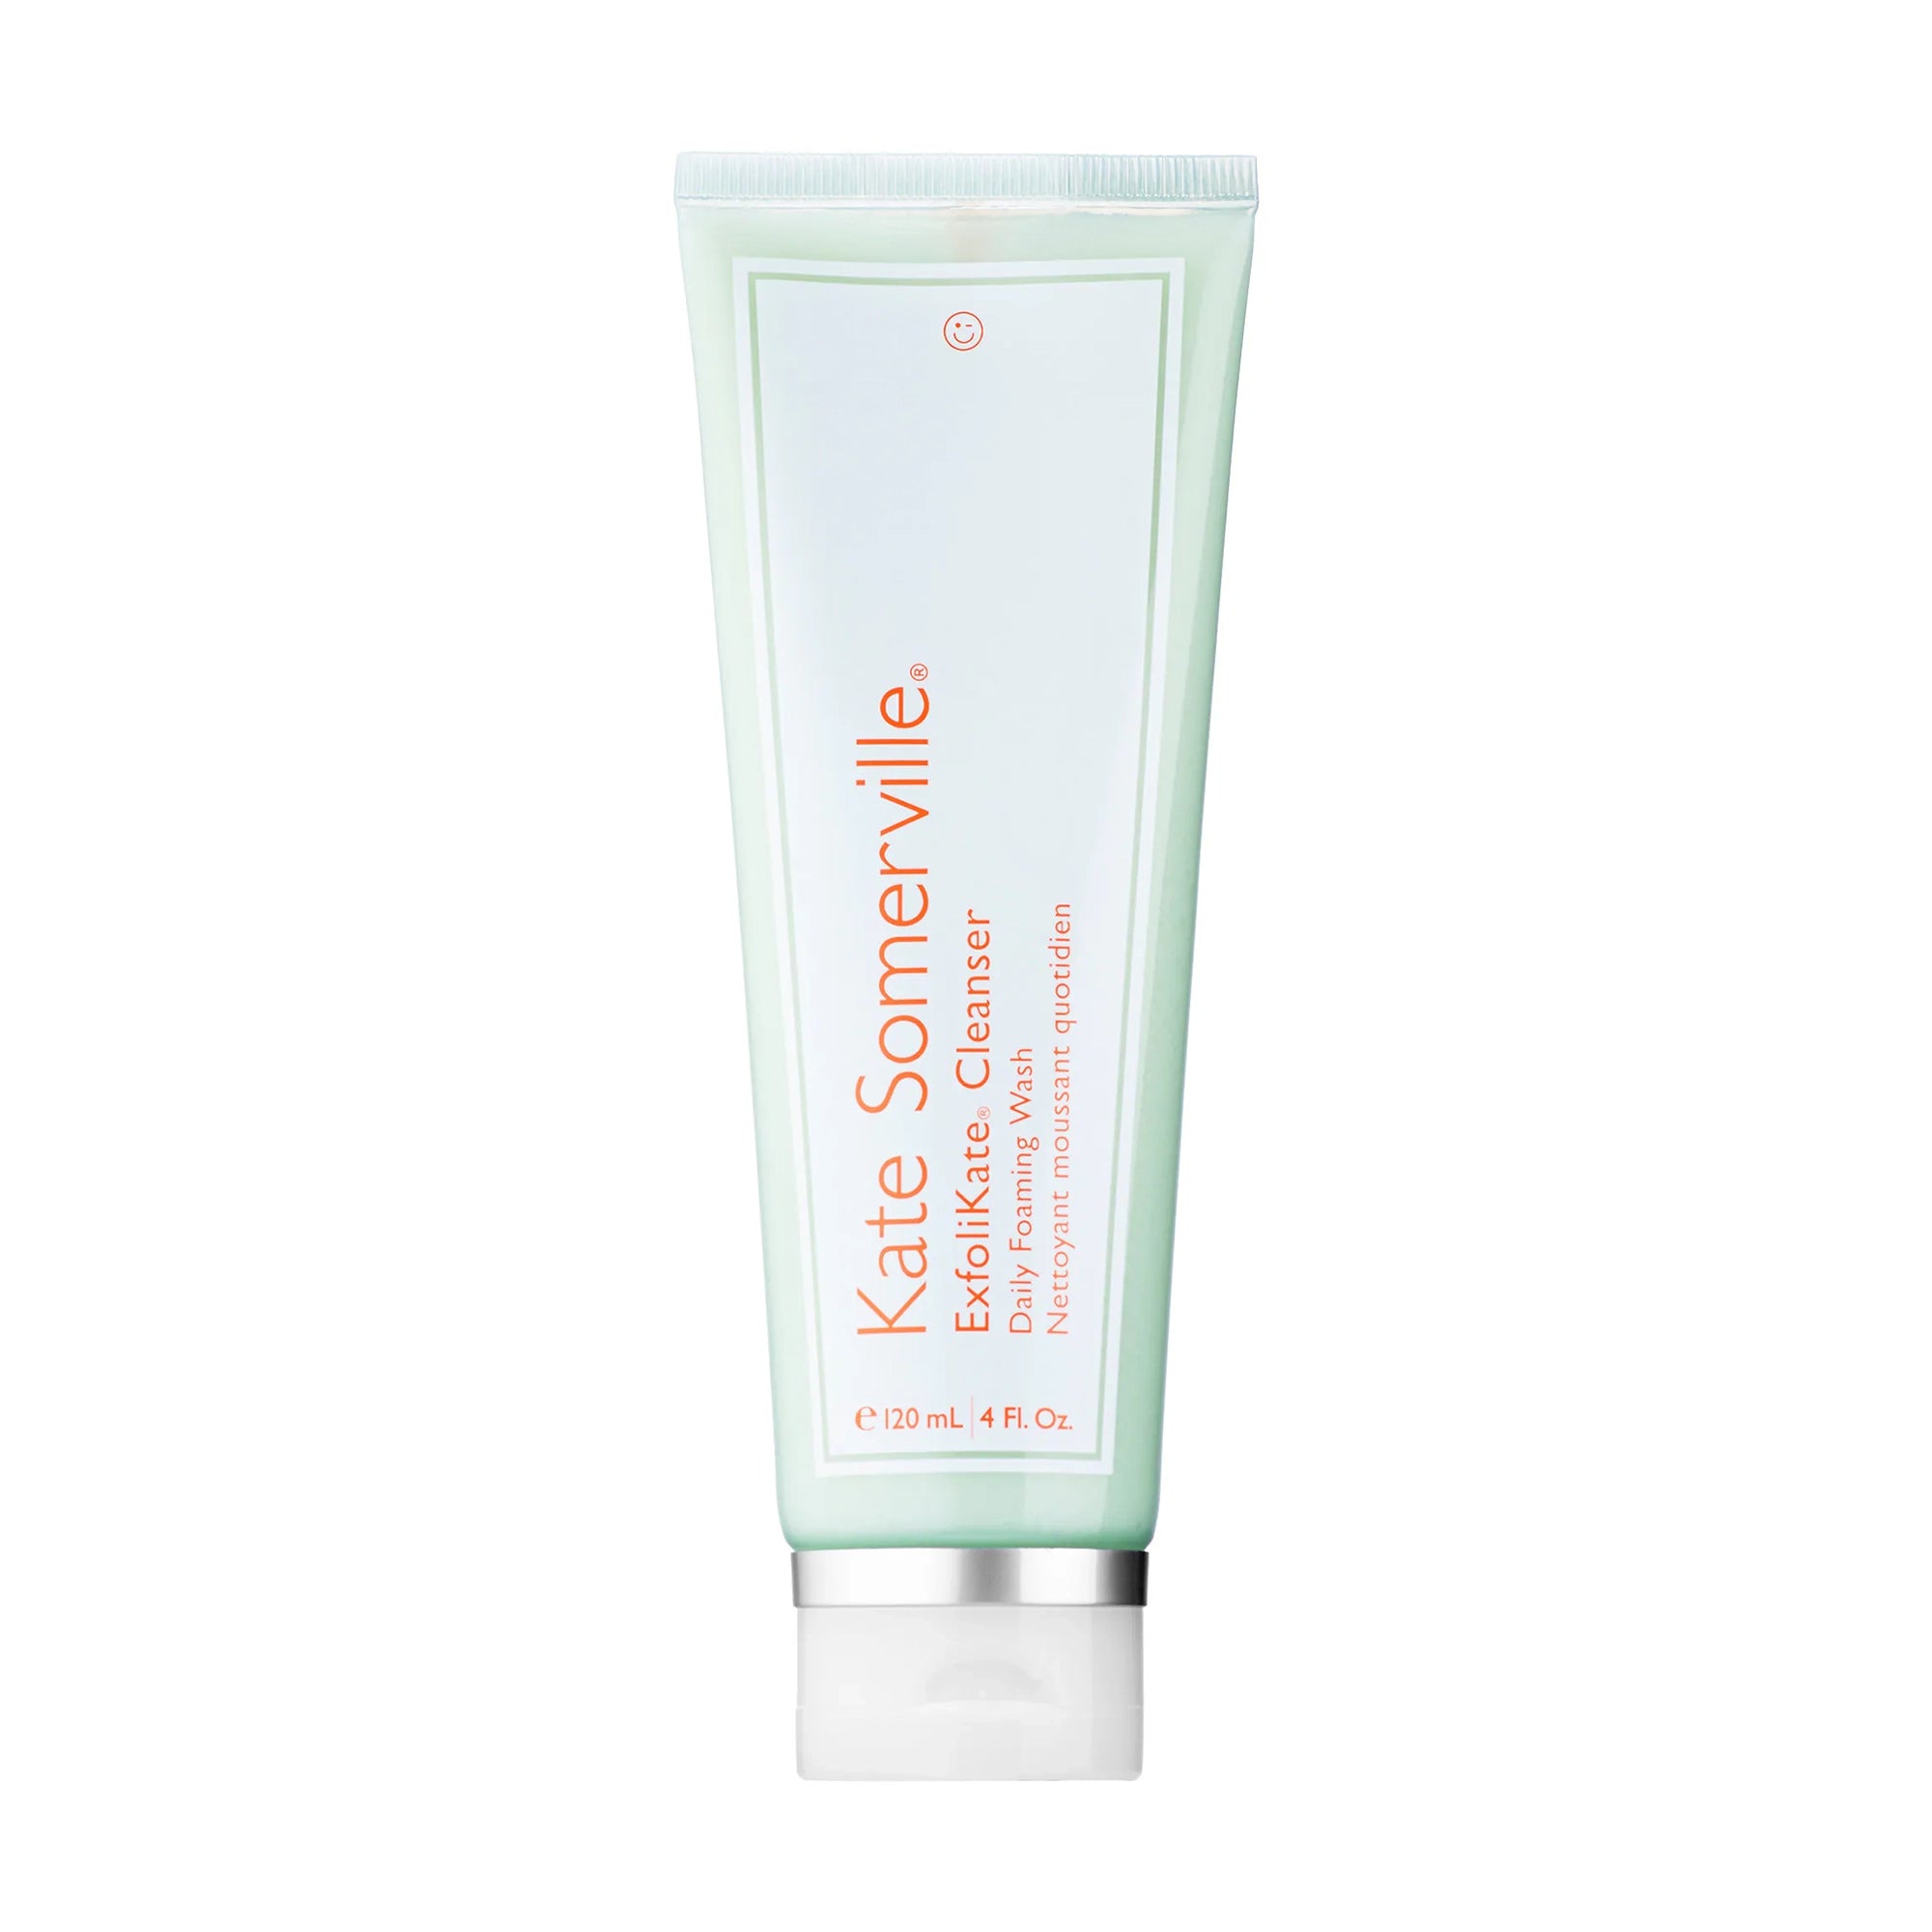 Kate Somerville ExfoliKate Cleanser Daily Foaming Wash / 4OZ